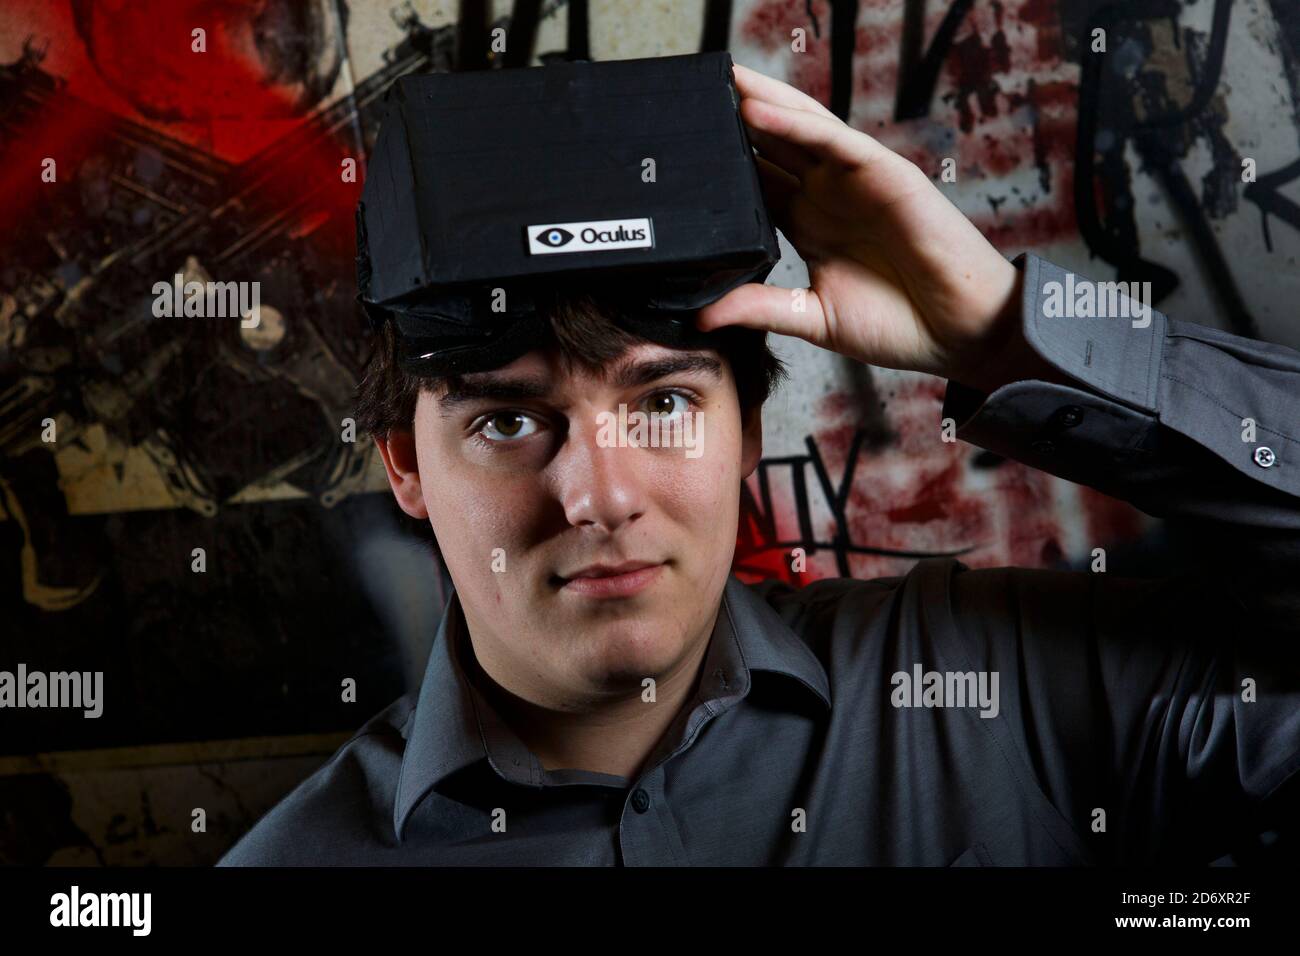 Irvine, California, USA. 6th Feb, 2013. Palmer Luckey, 20, the creator of  the Oculus Rift virtual reality video game headset that the Oculus company  is developing in Irvine, California on Wednesday, February